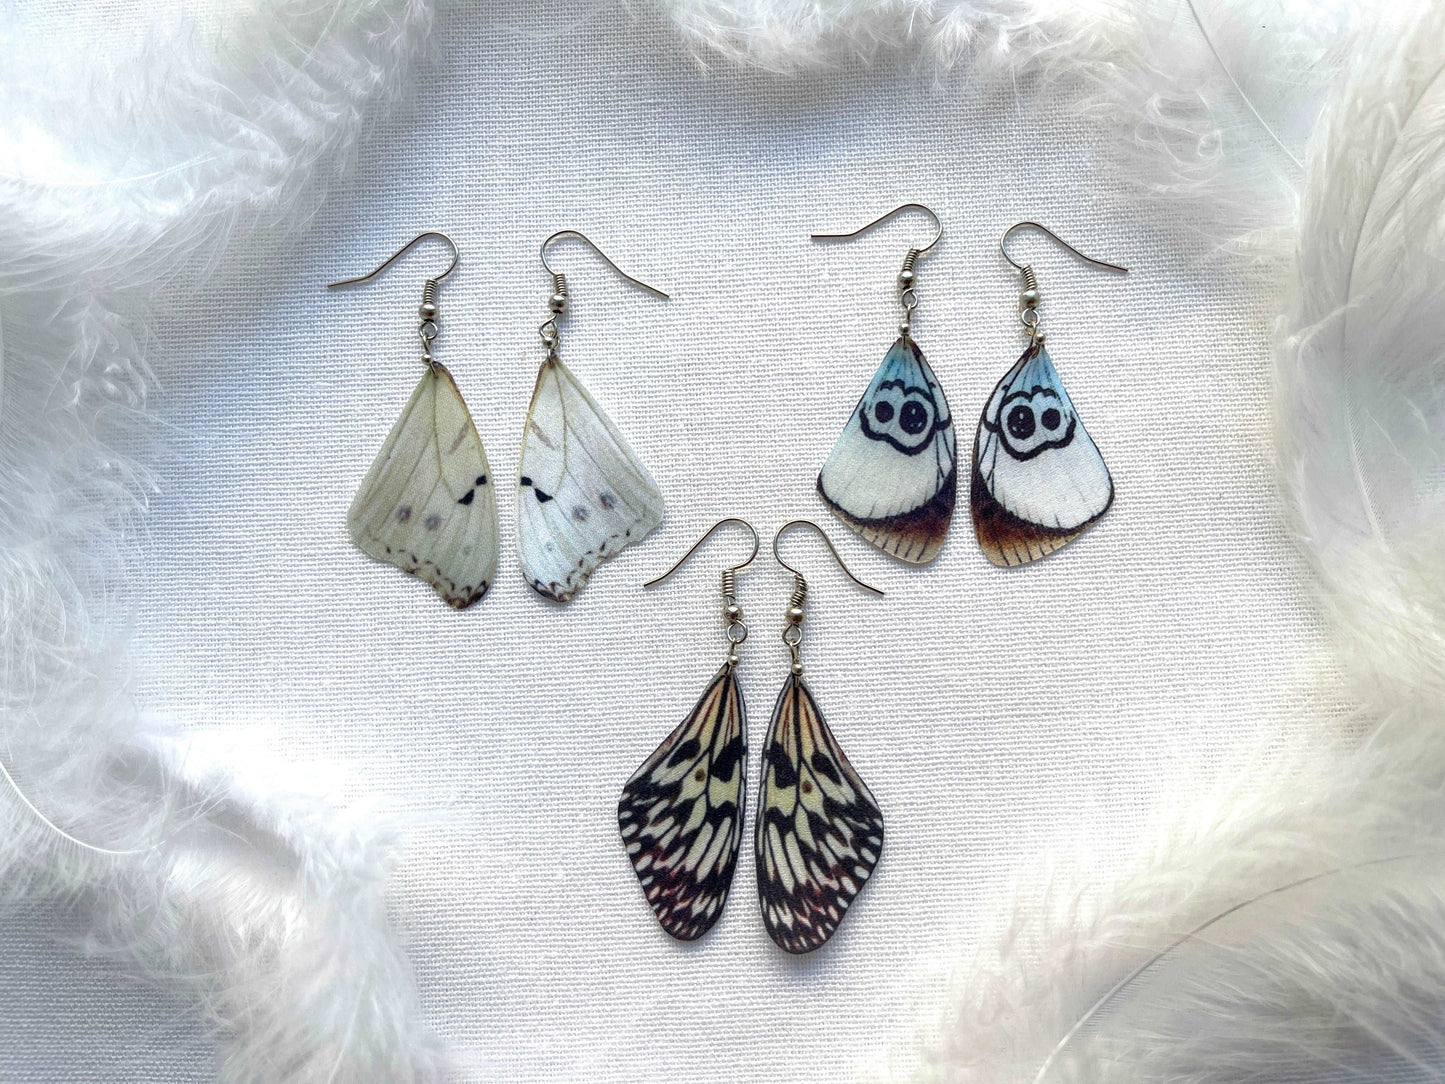 Lightweight Butterfly Earrings with Cool and Quirky Design